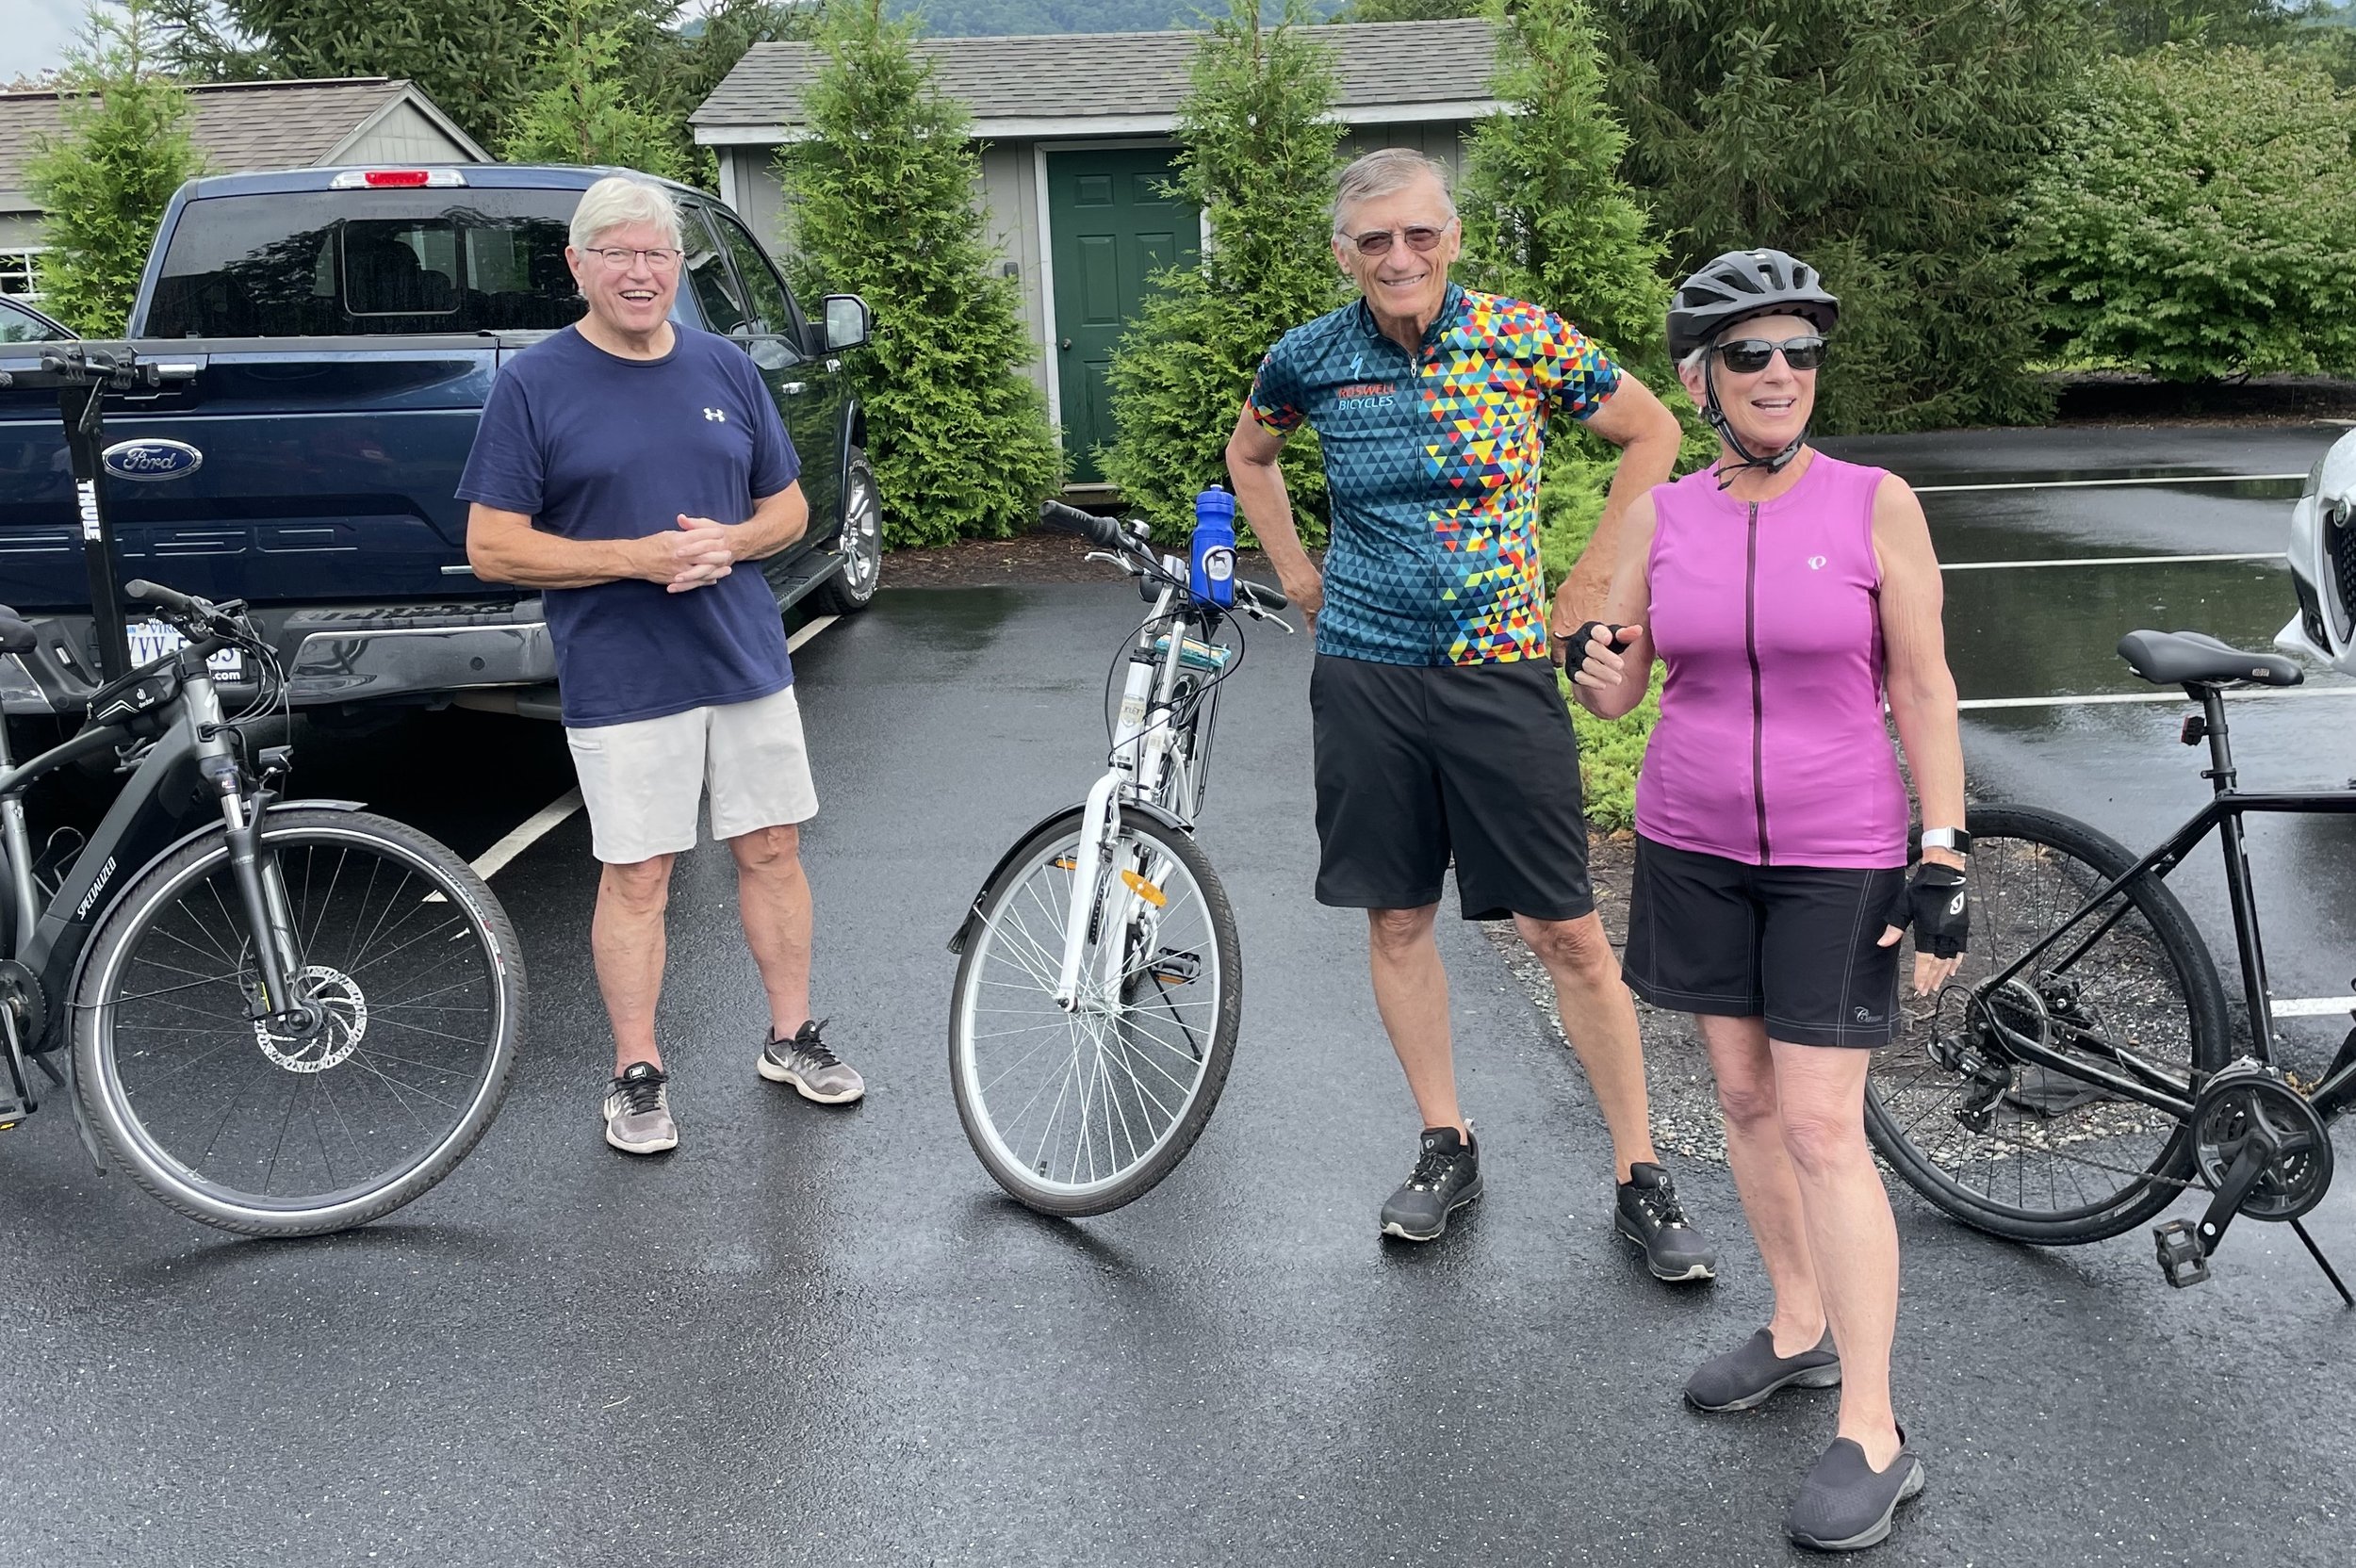 WSC Biking Group Lead Tim Jordan (left) with the July ride leaders Bob and Patty Browne.